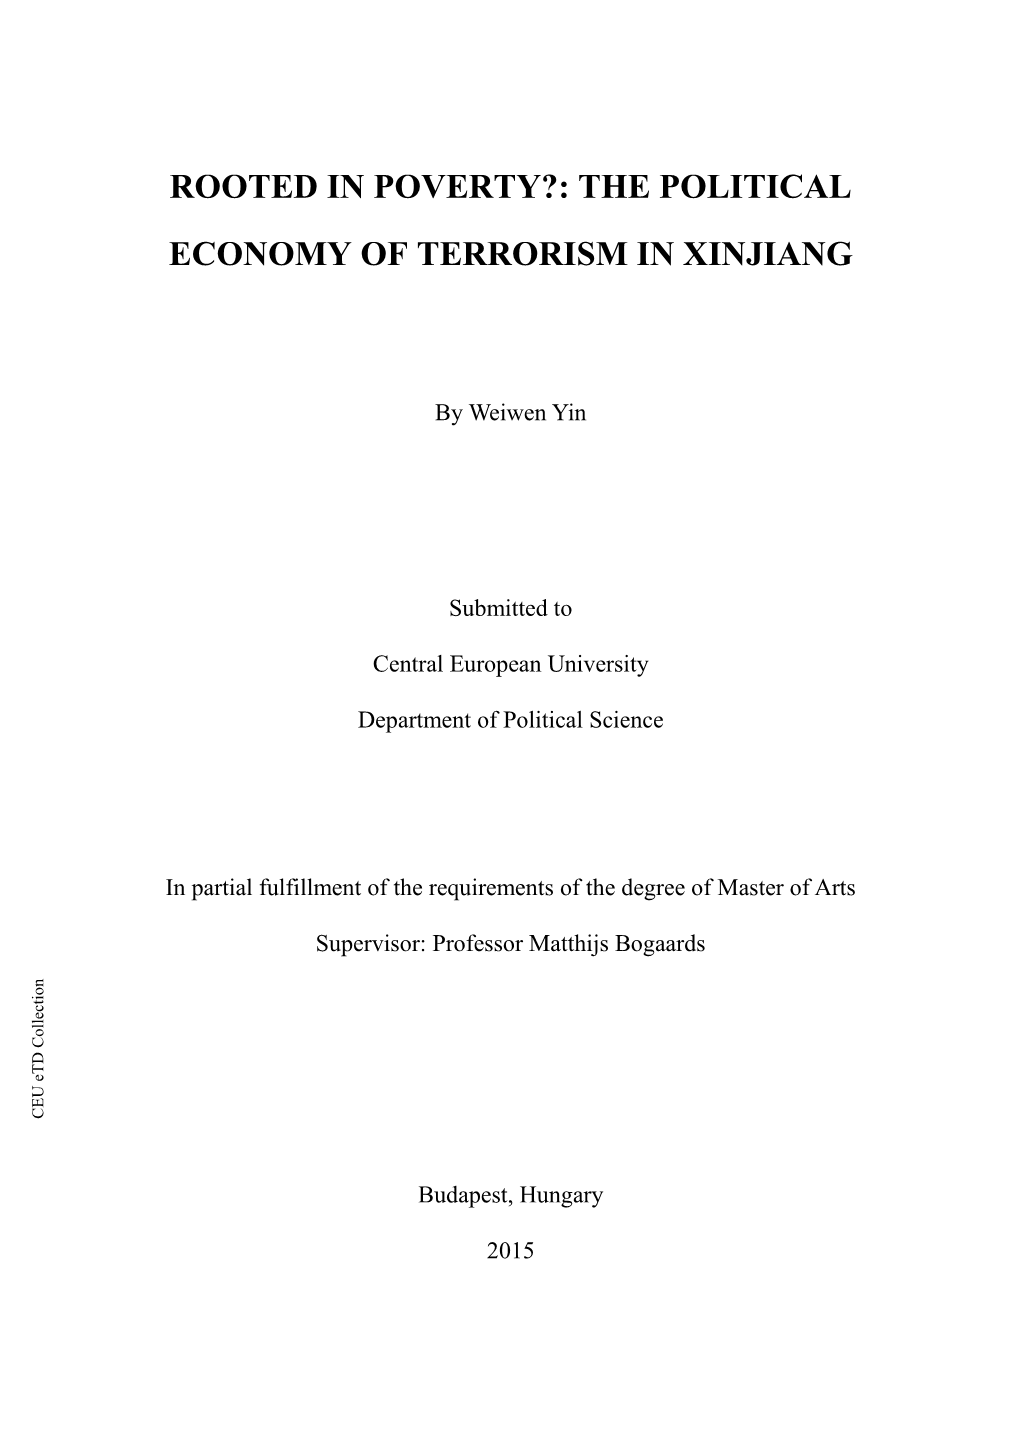 The Political Economy of Terrorism in Xinjiang